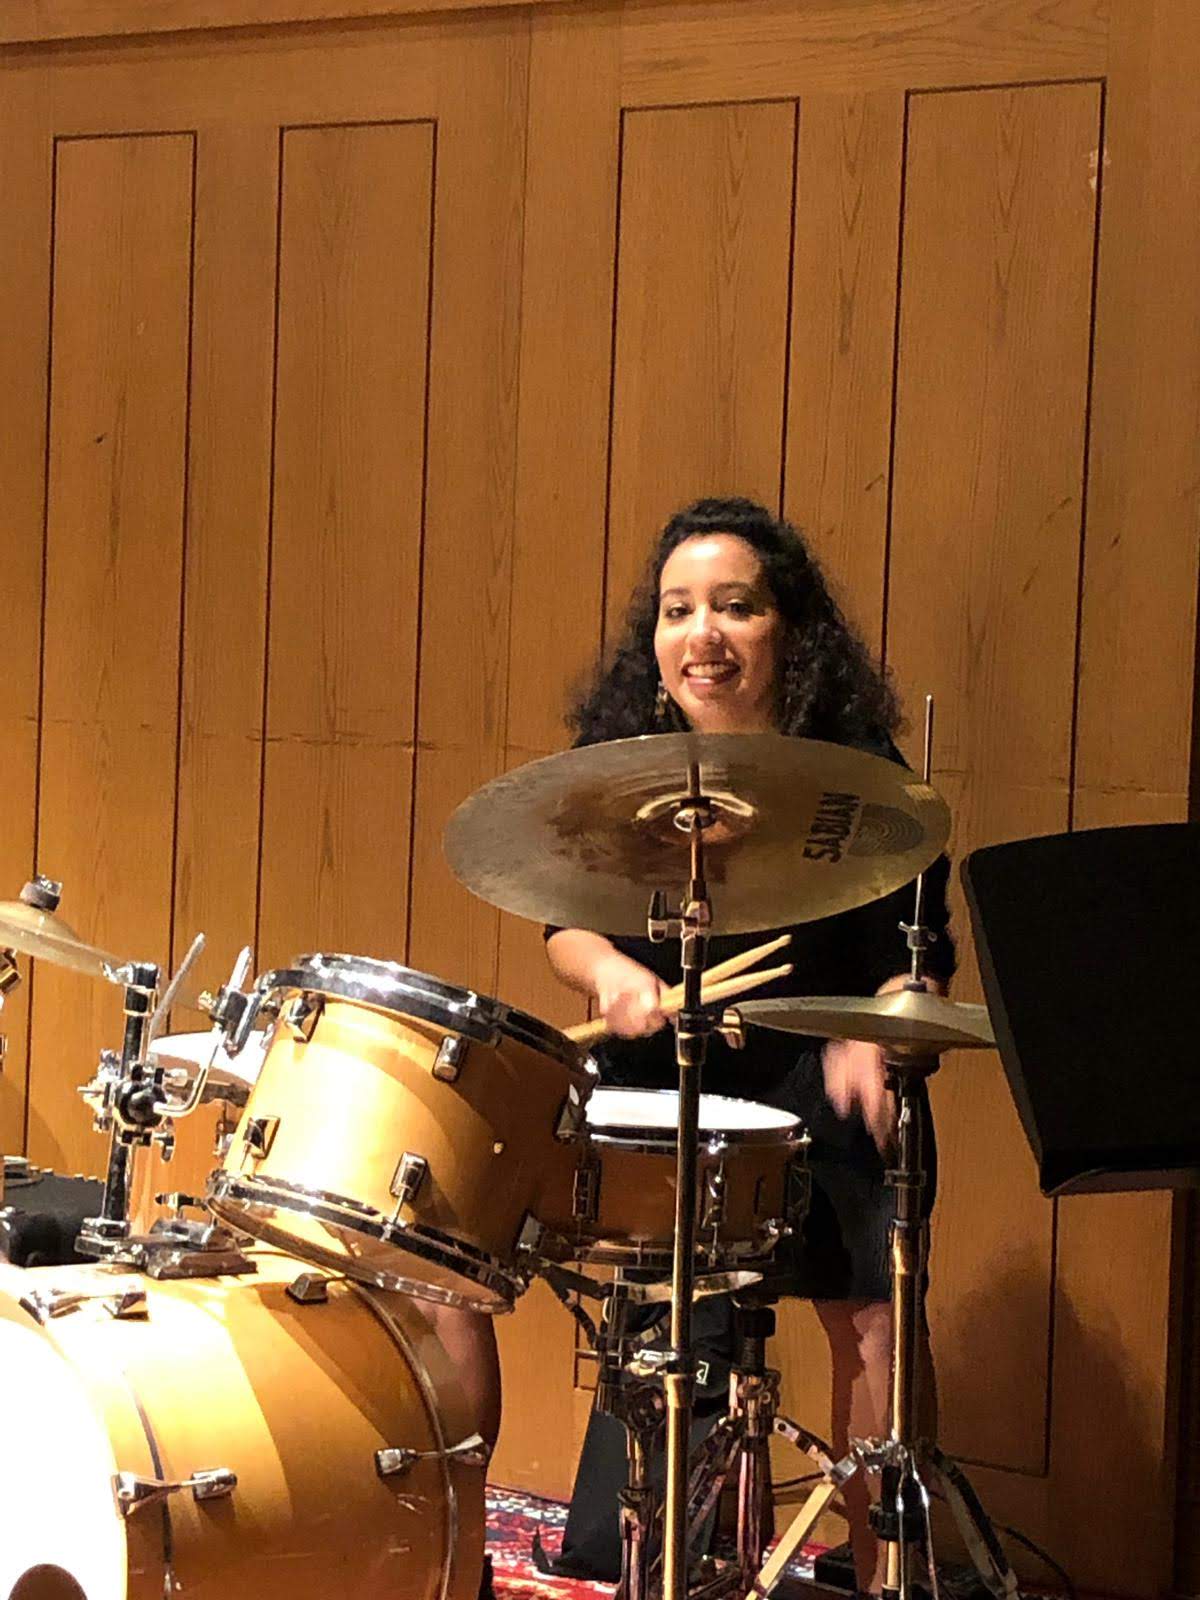 Smiling woman plays drums with wood paneling in the background